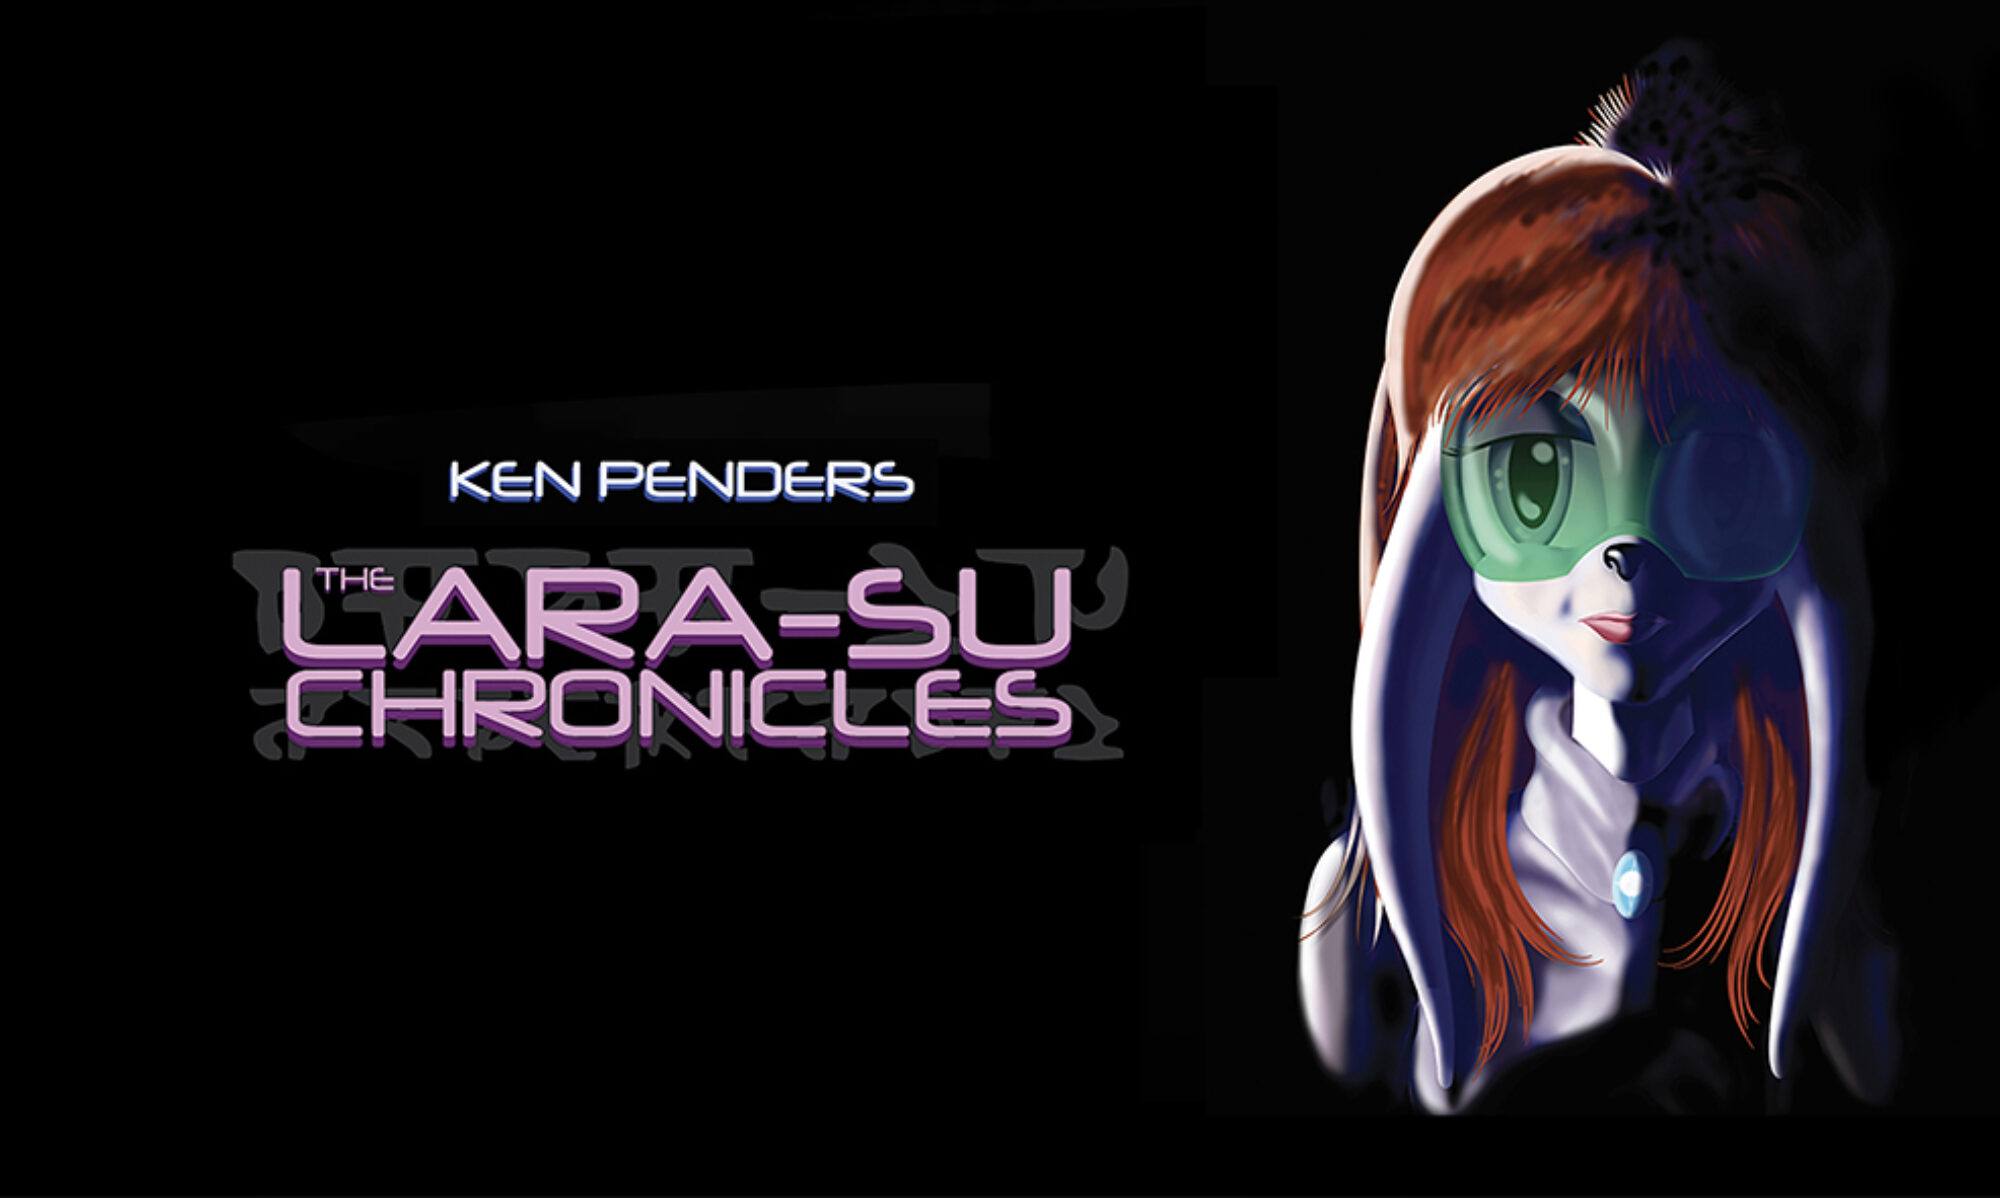 Sonic Art Resources — cool-sweet-and-catchy: Lara-su Chronicles by